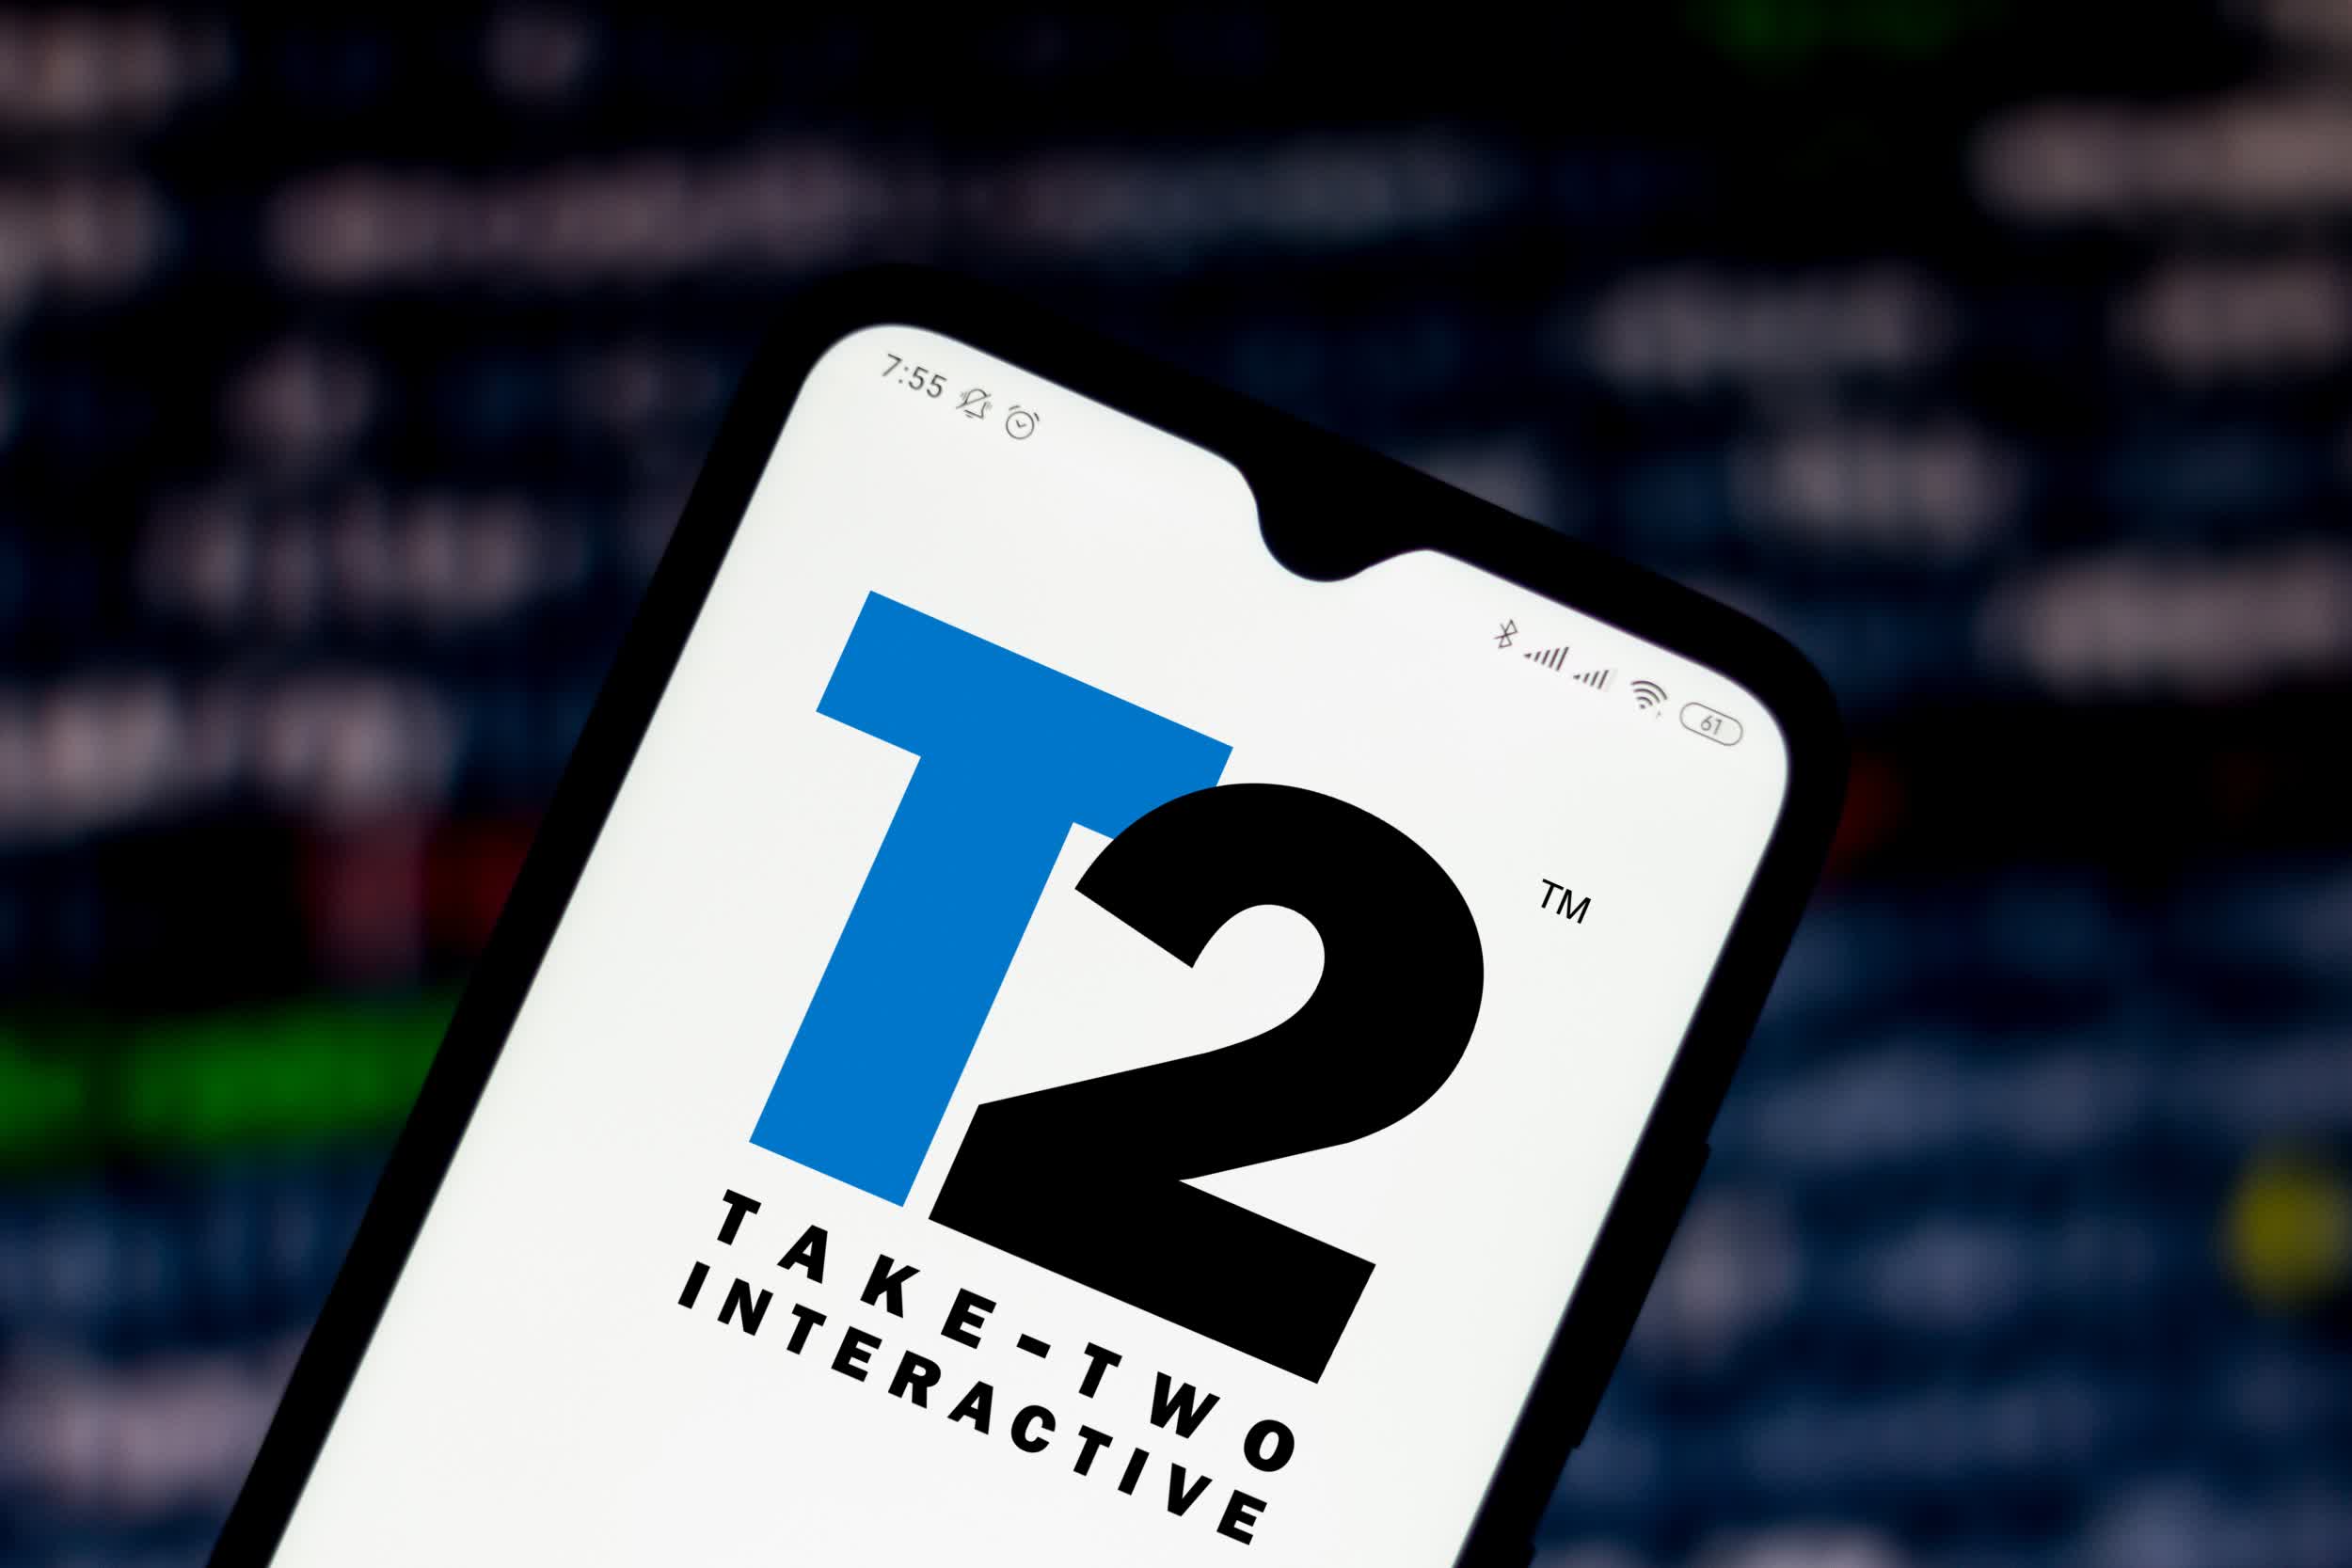 Take-Two launched patent disputes over the terms 'Rockstar,' 'Bully,' and 'It Takes Two'